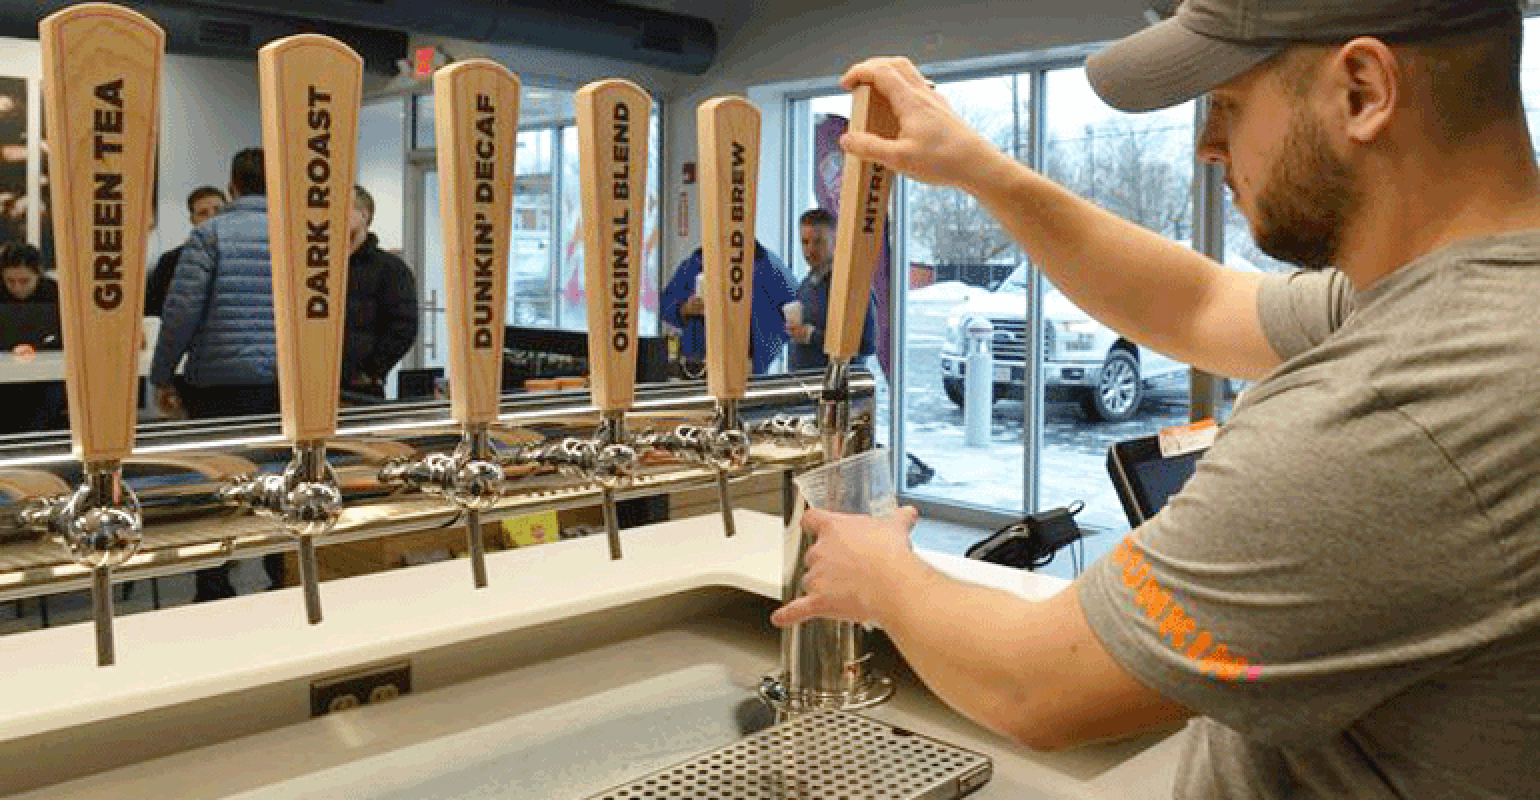 Hey guys lets make a Nitro Cold Brew. Only available at Dunkin' On Tap